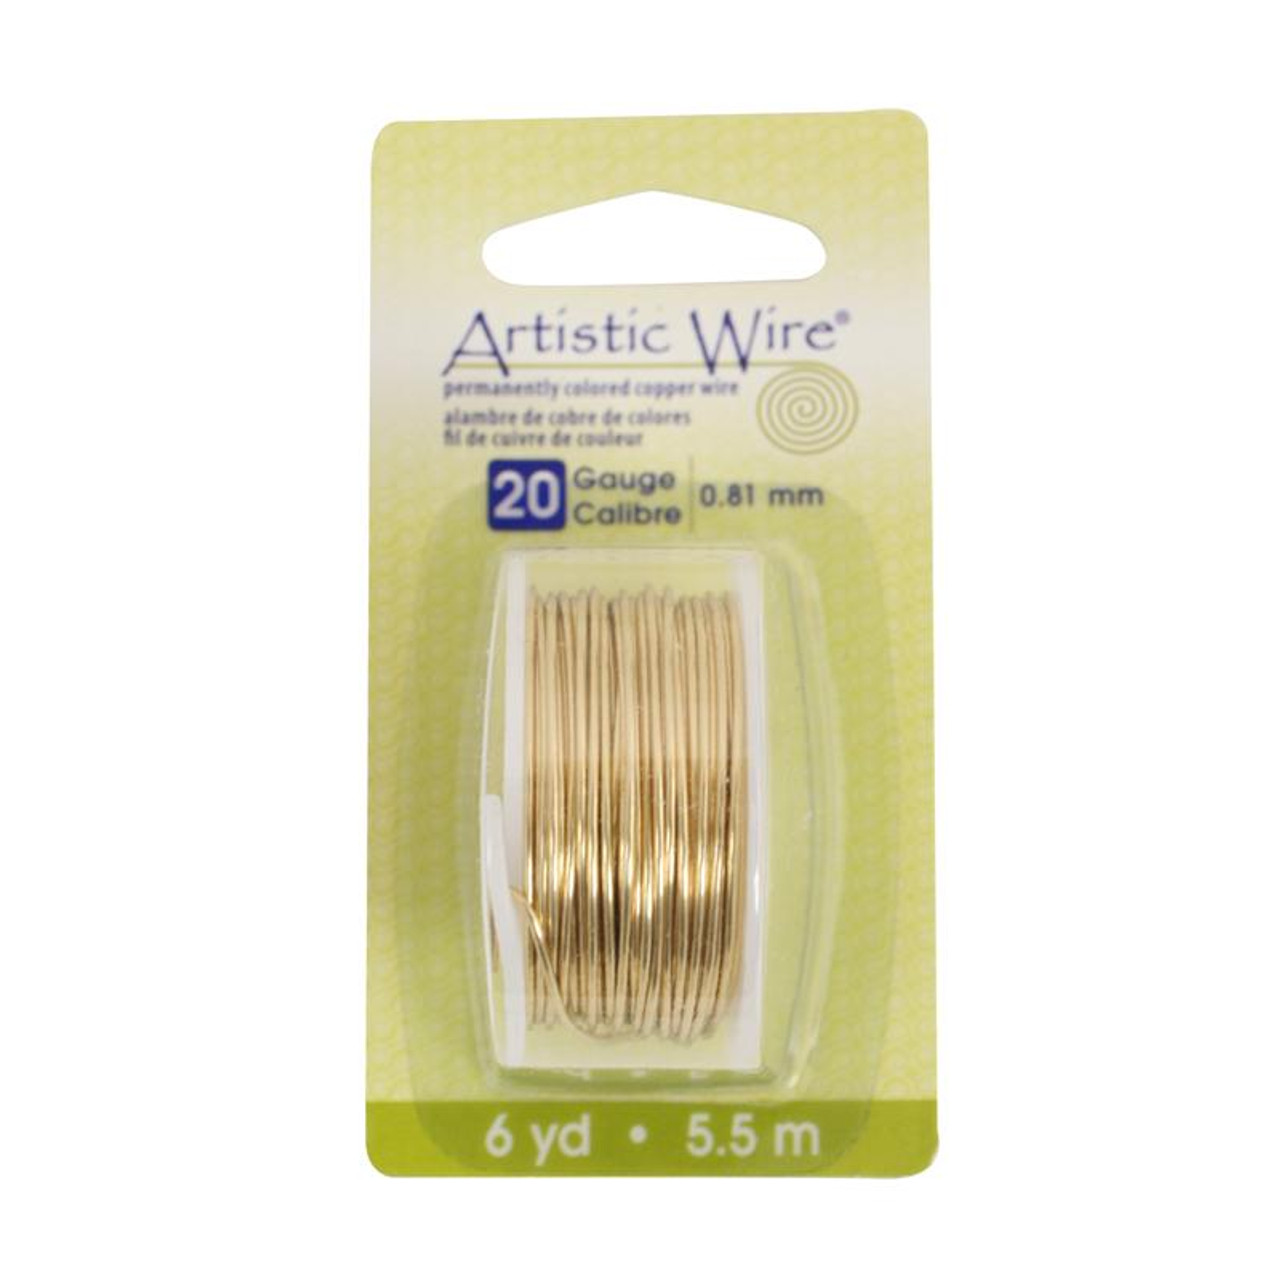 Artistic Wire Variety Pack of 12 Colored Copper Craft Wire 20 Gauge awg  Non-Tarnishing